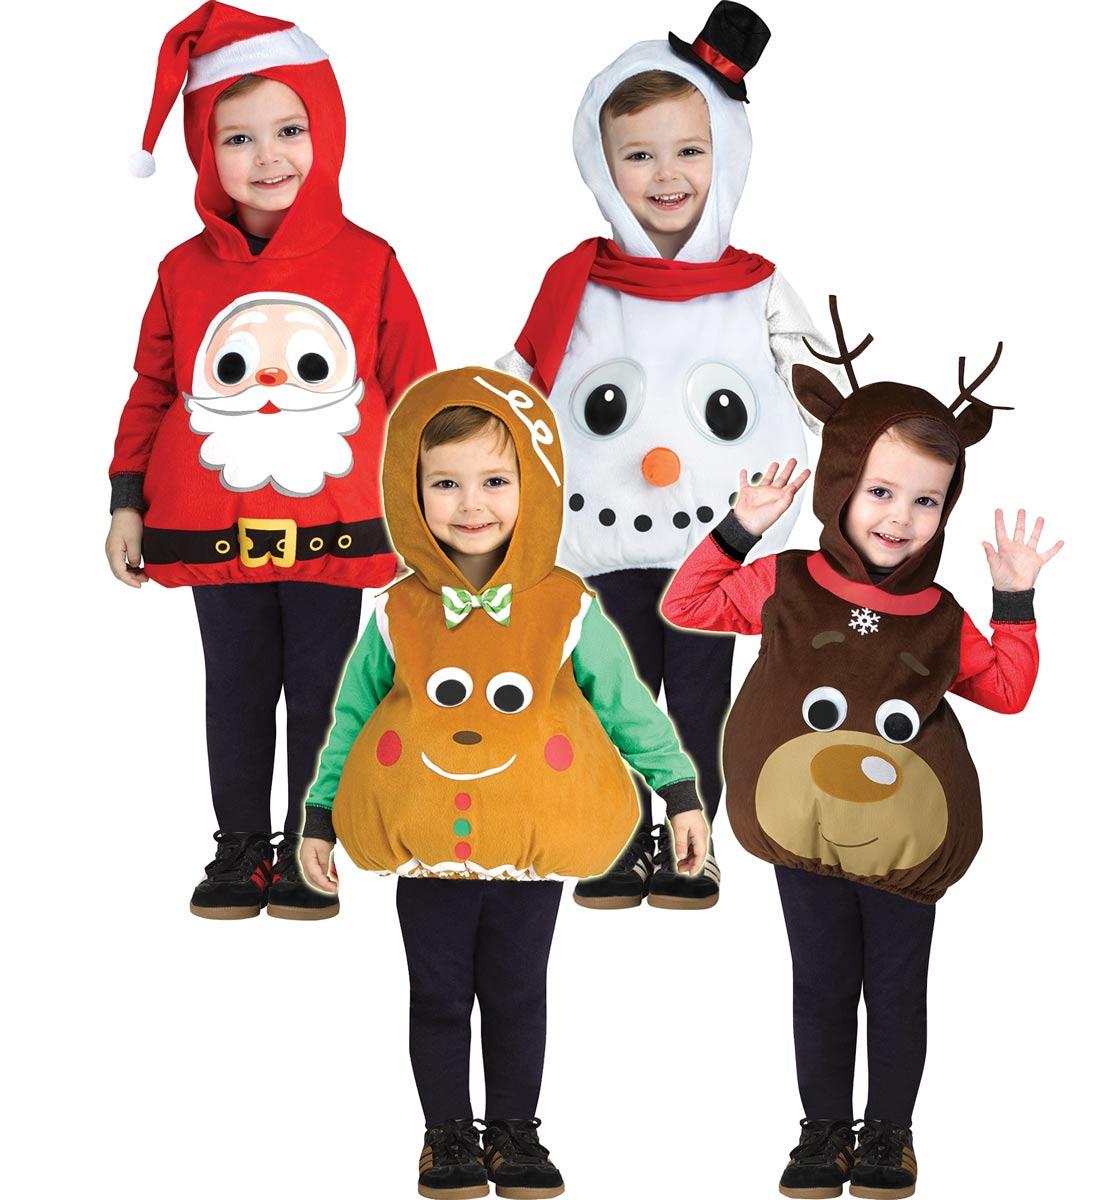 Googly Eye Tunic Christmas Assortment by Fun World 7769 available here at Karnival Costumes online Christmas party shop